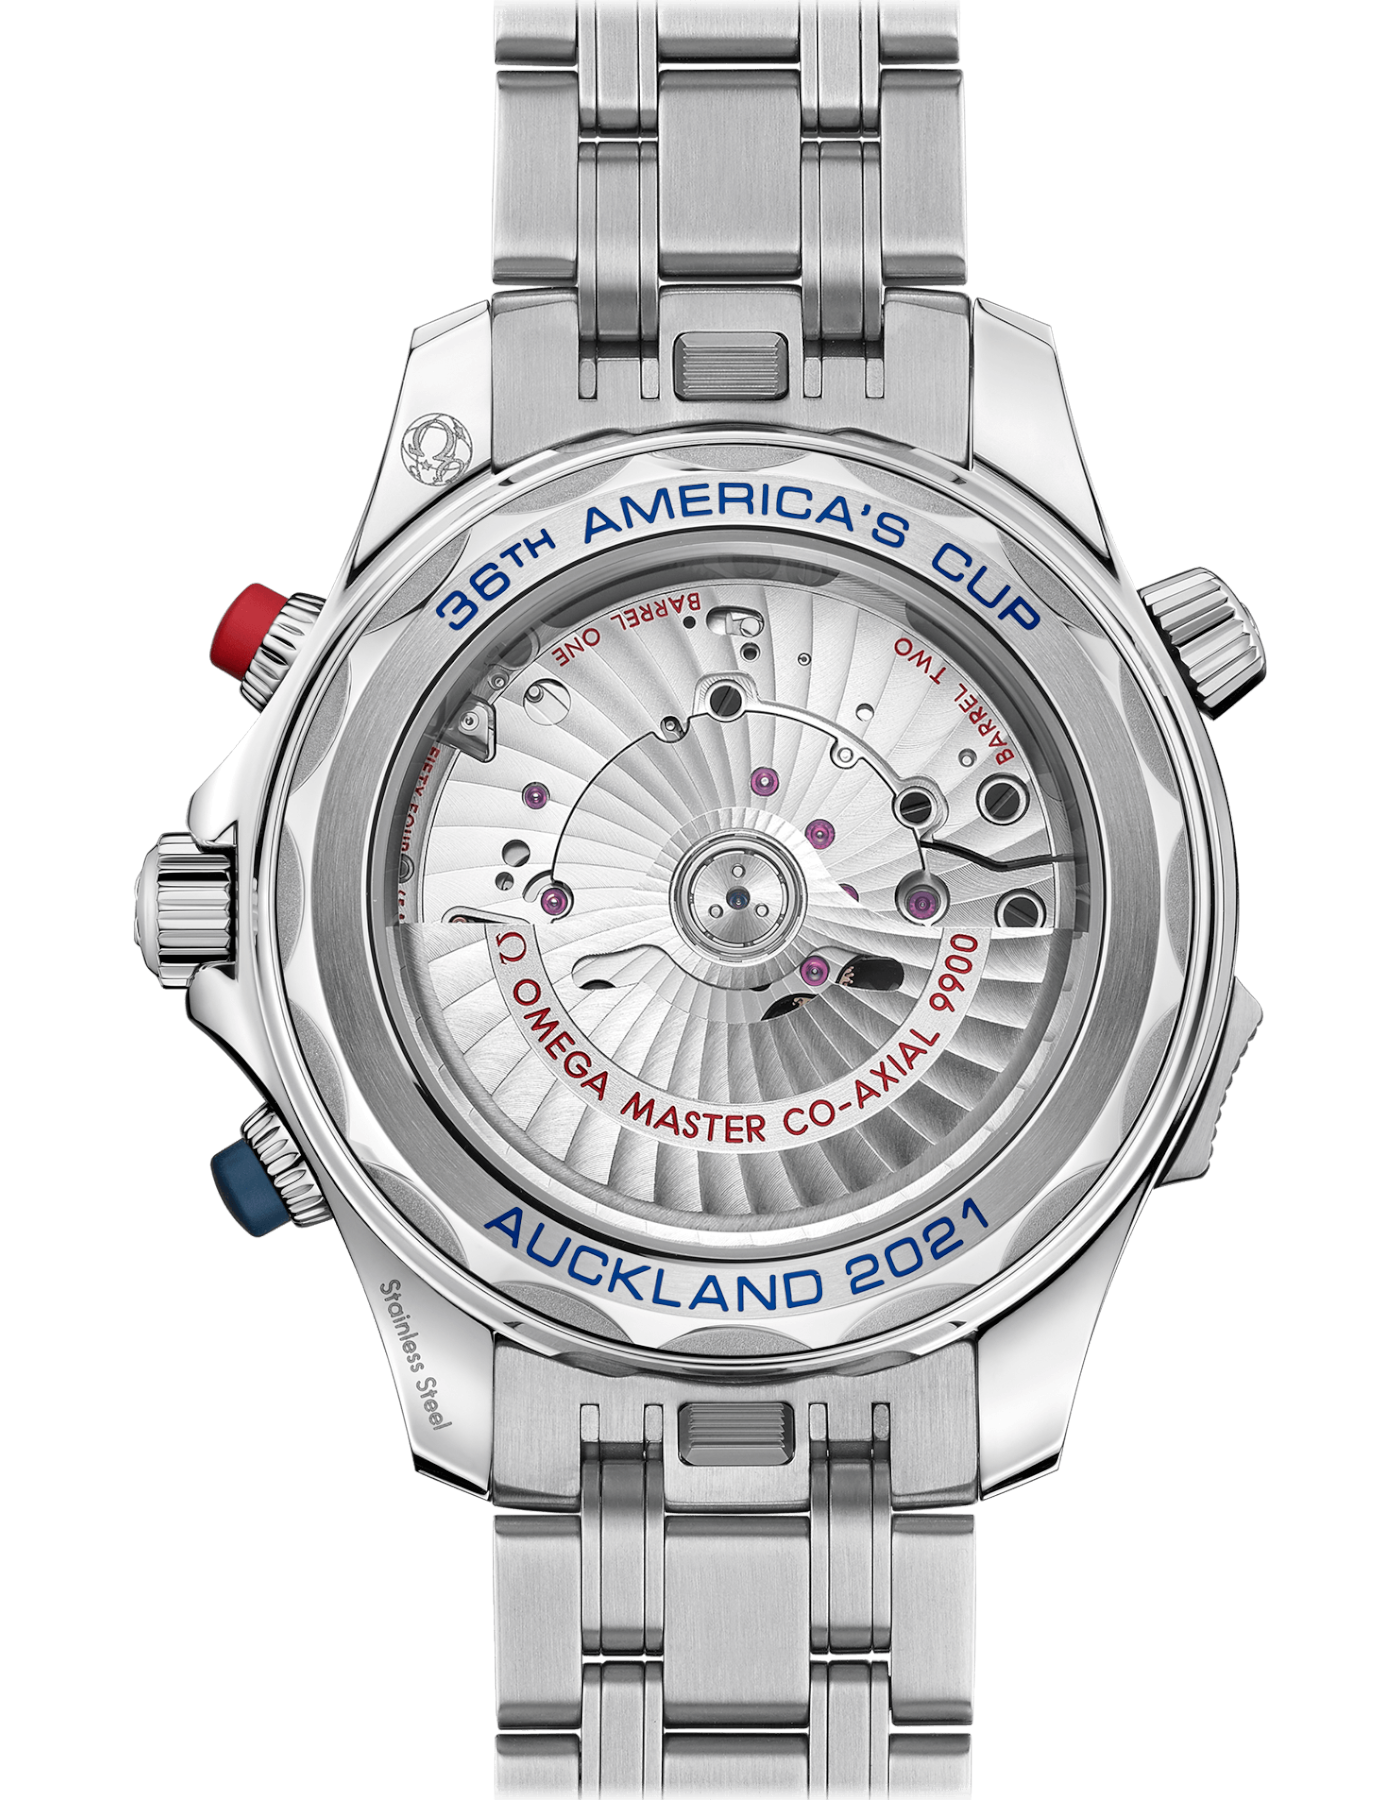 SEAMASTER DIVER 300M CO‑AXIAL MASTER CHRONOMETER CHRONOGRAPH 44 MM "America's Cup"